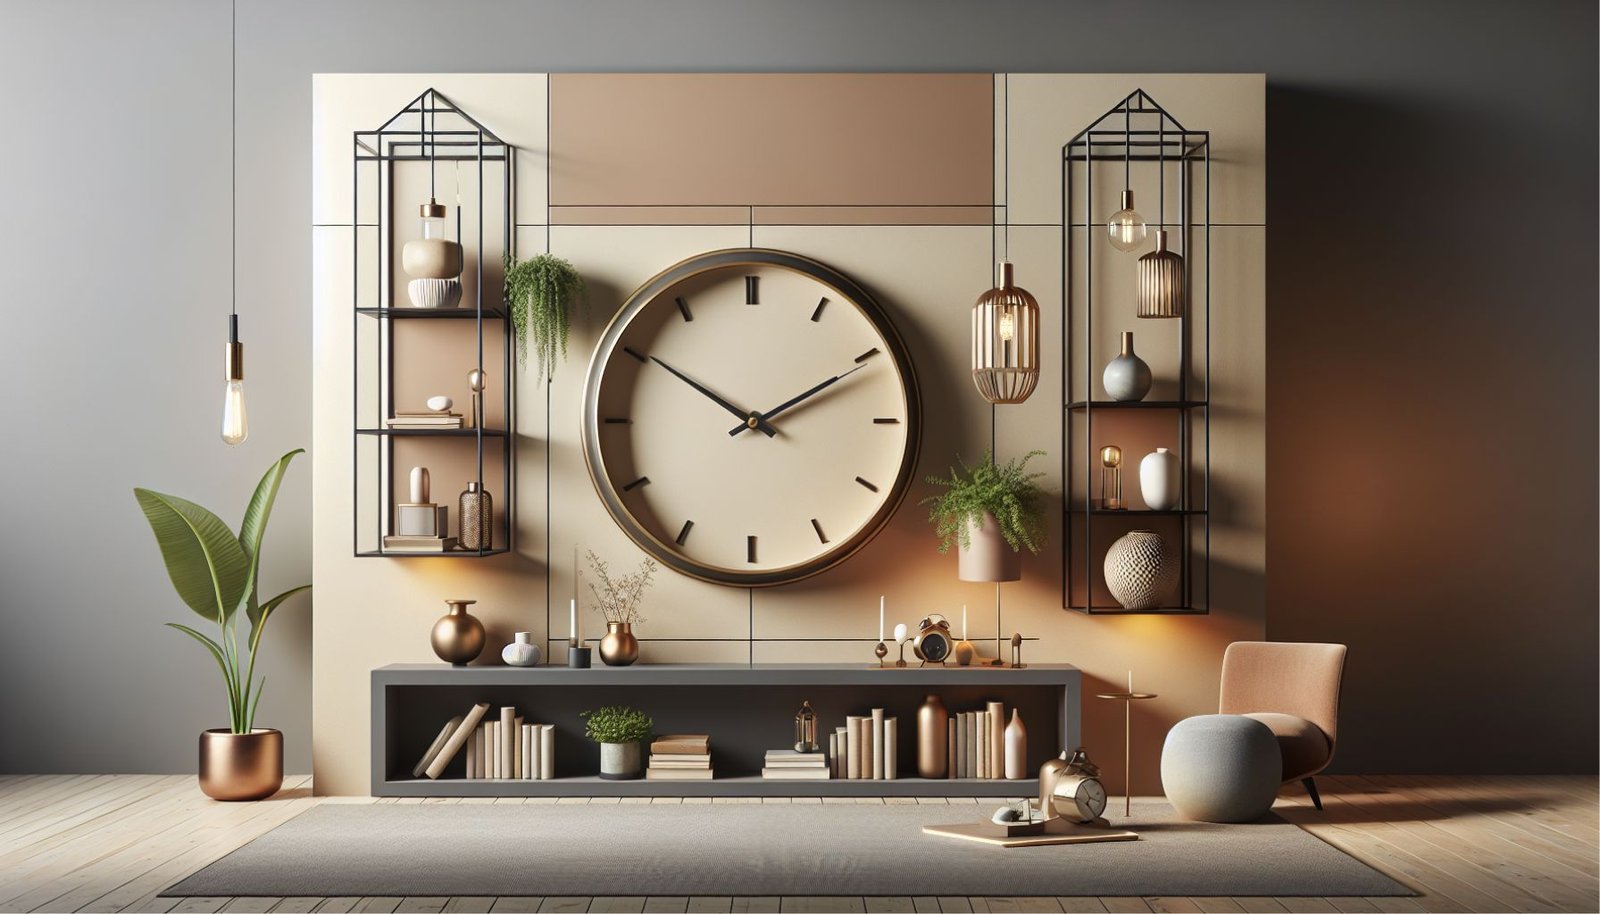 How to Decorate Around a Large Wall Clock